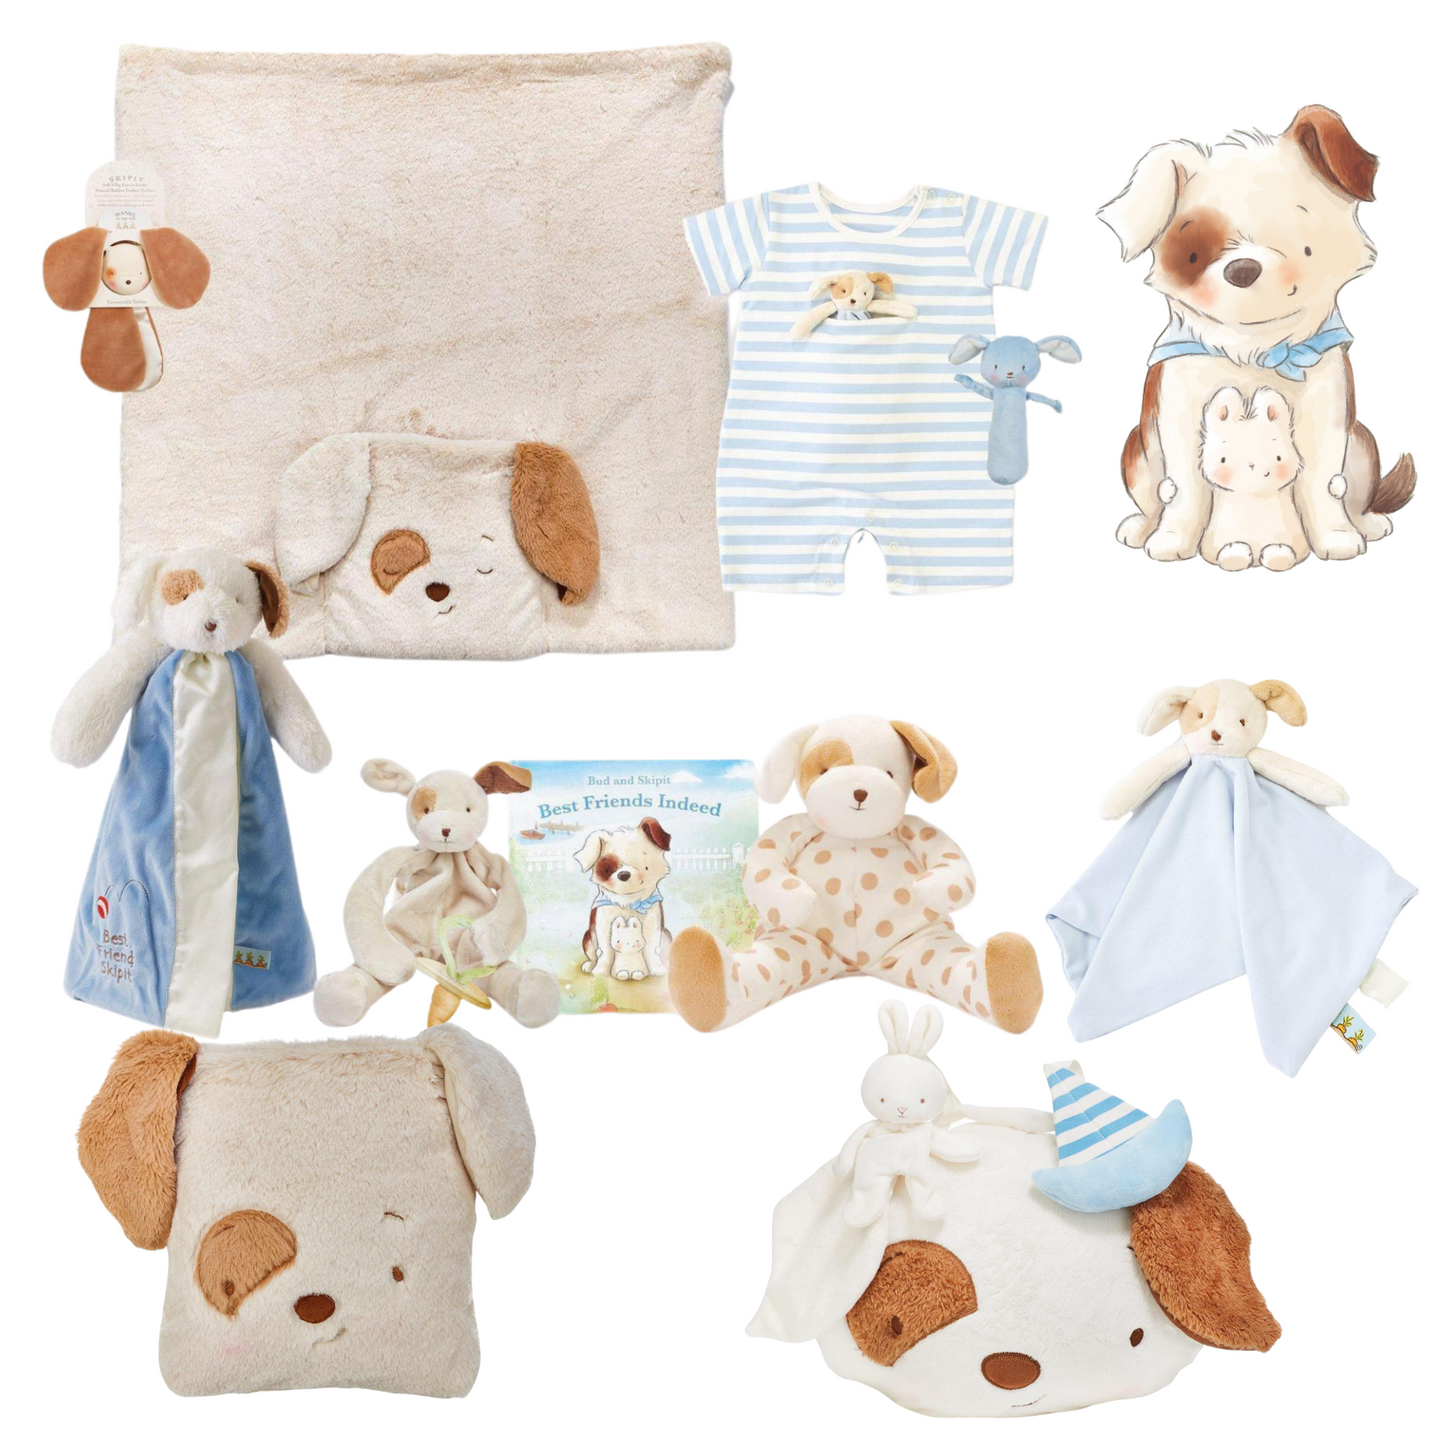 Skipit Pup’s Everything Baby Bundle Plus Playmat